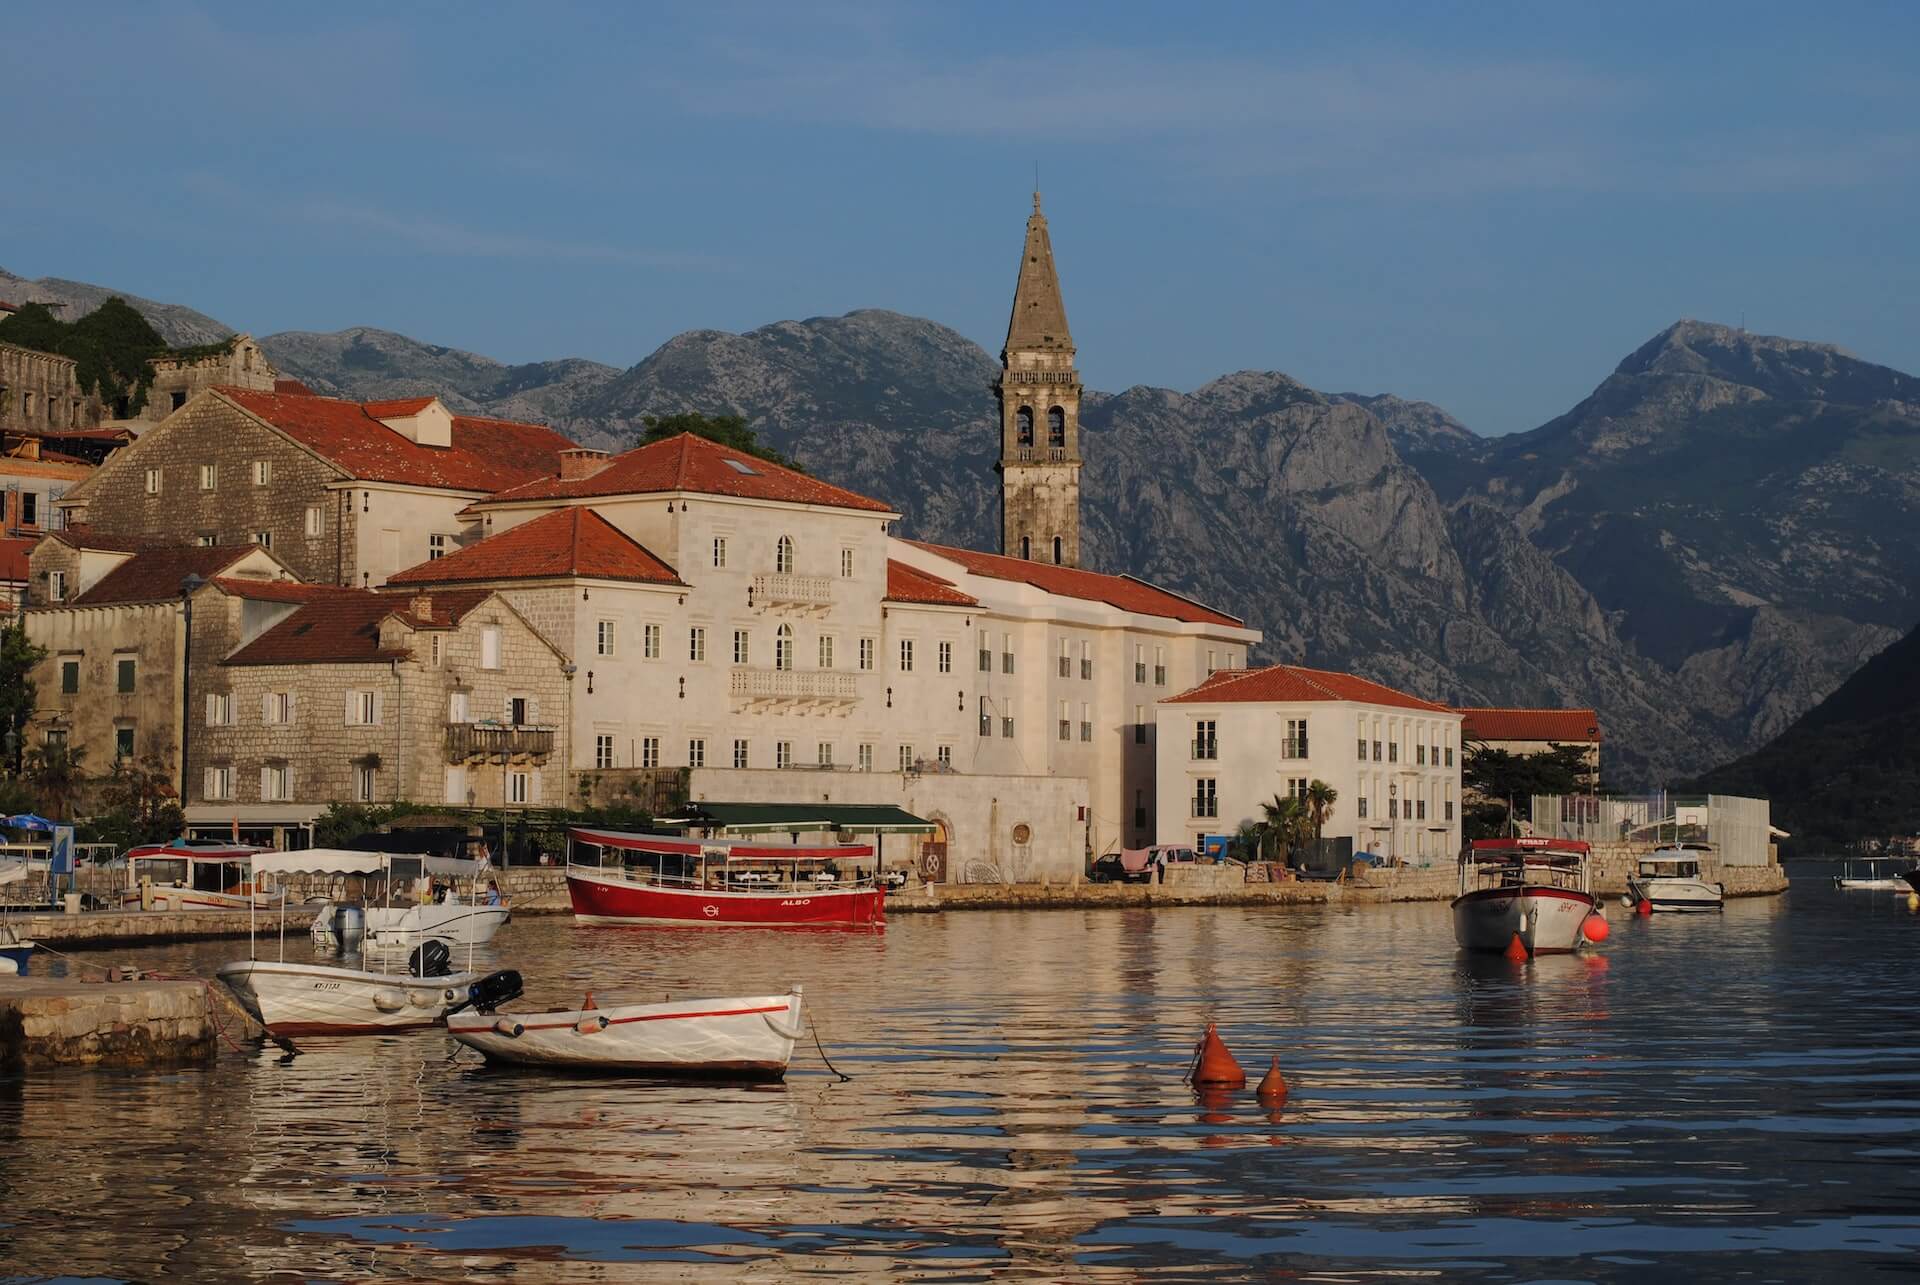 Guide to Montenegro - A view of Perast in Kotor Bay